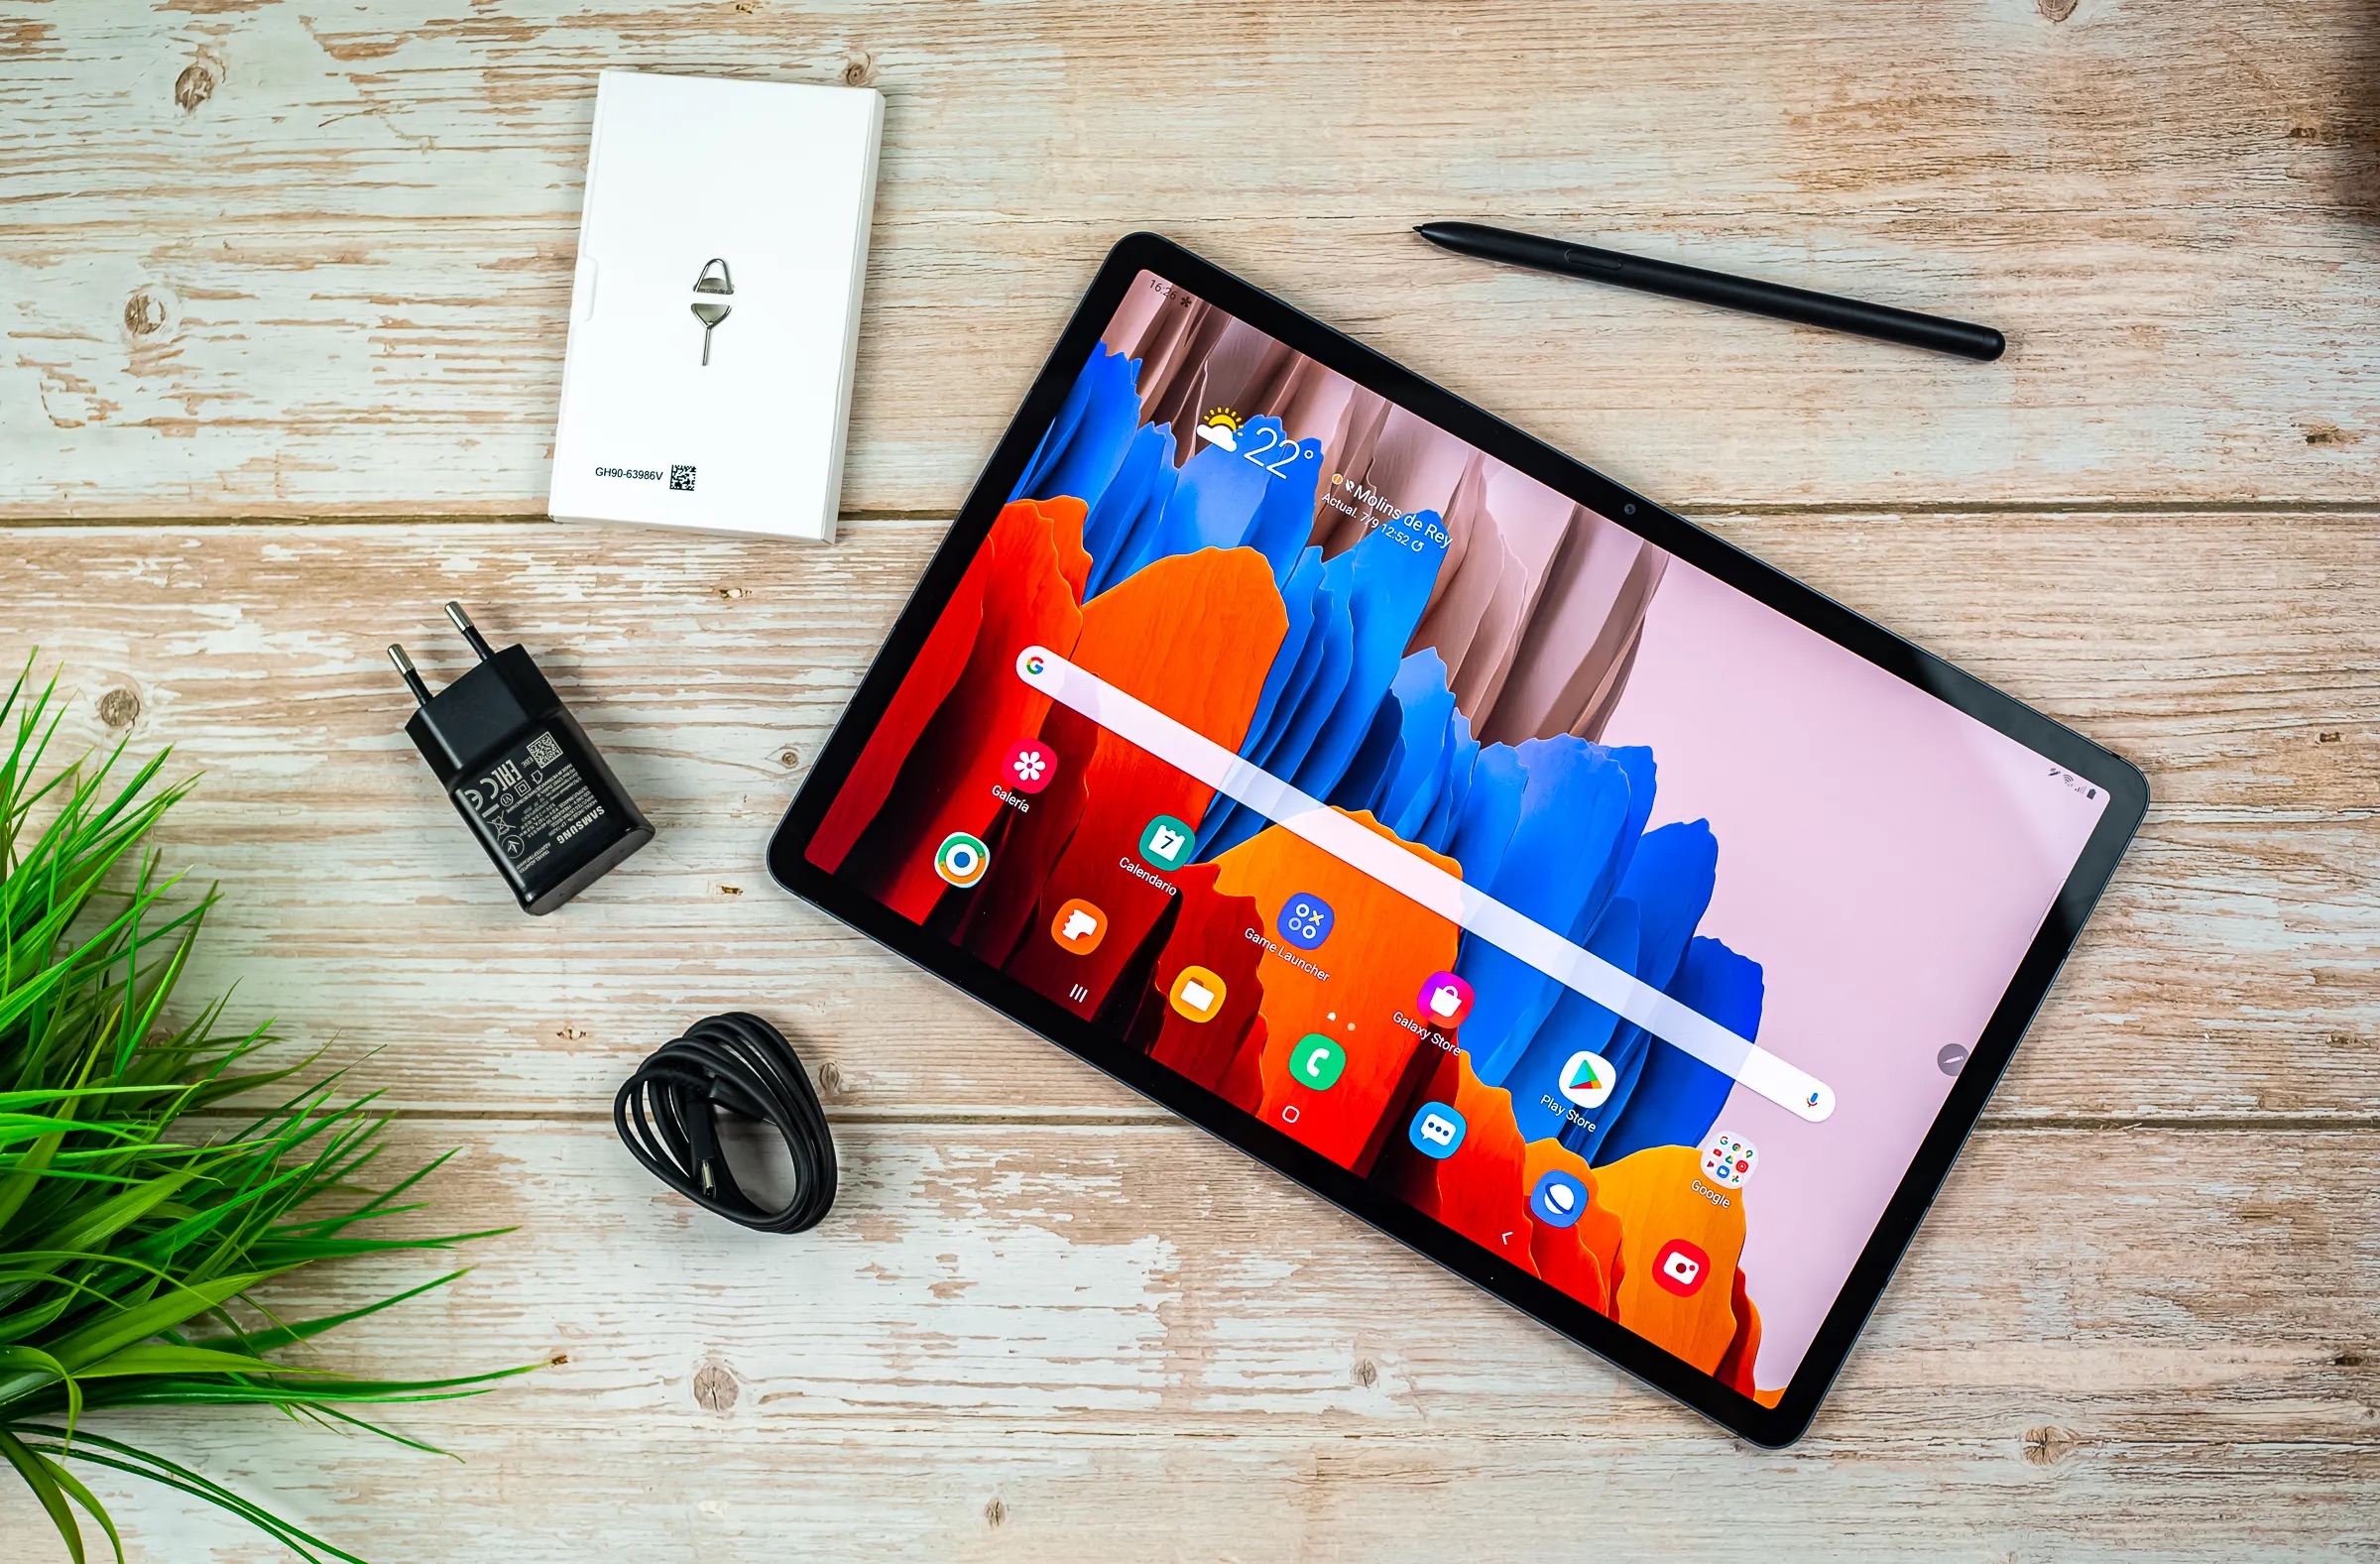 This Samsung tablet can be yours for $75 for Black Friday